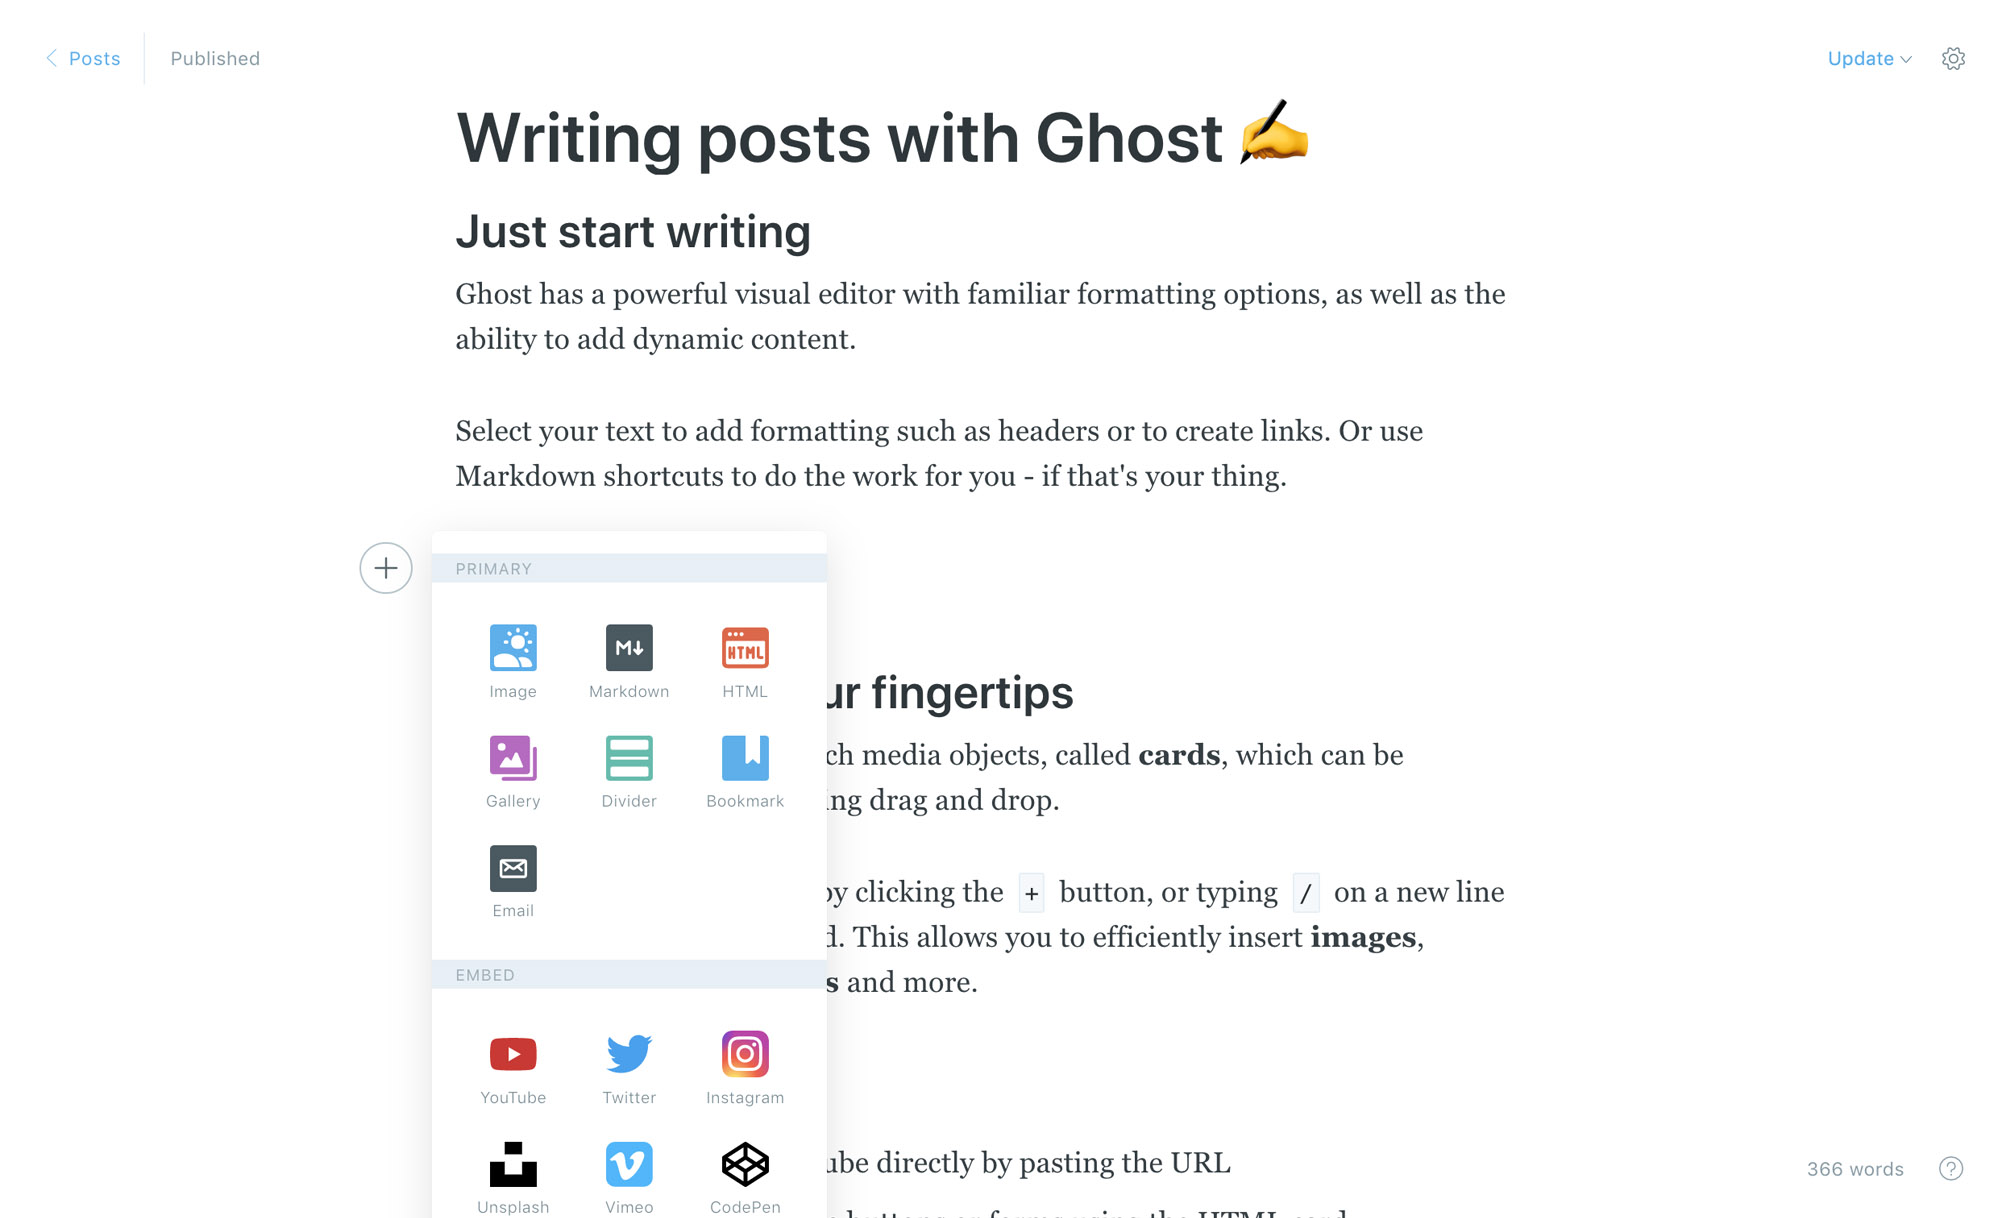 Writing your first ghost blog post on your started Ghost blog